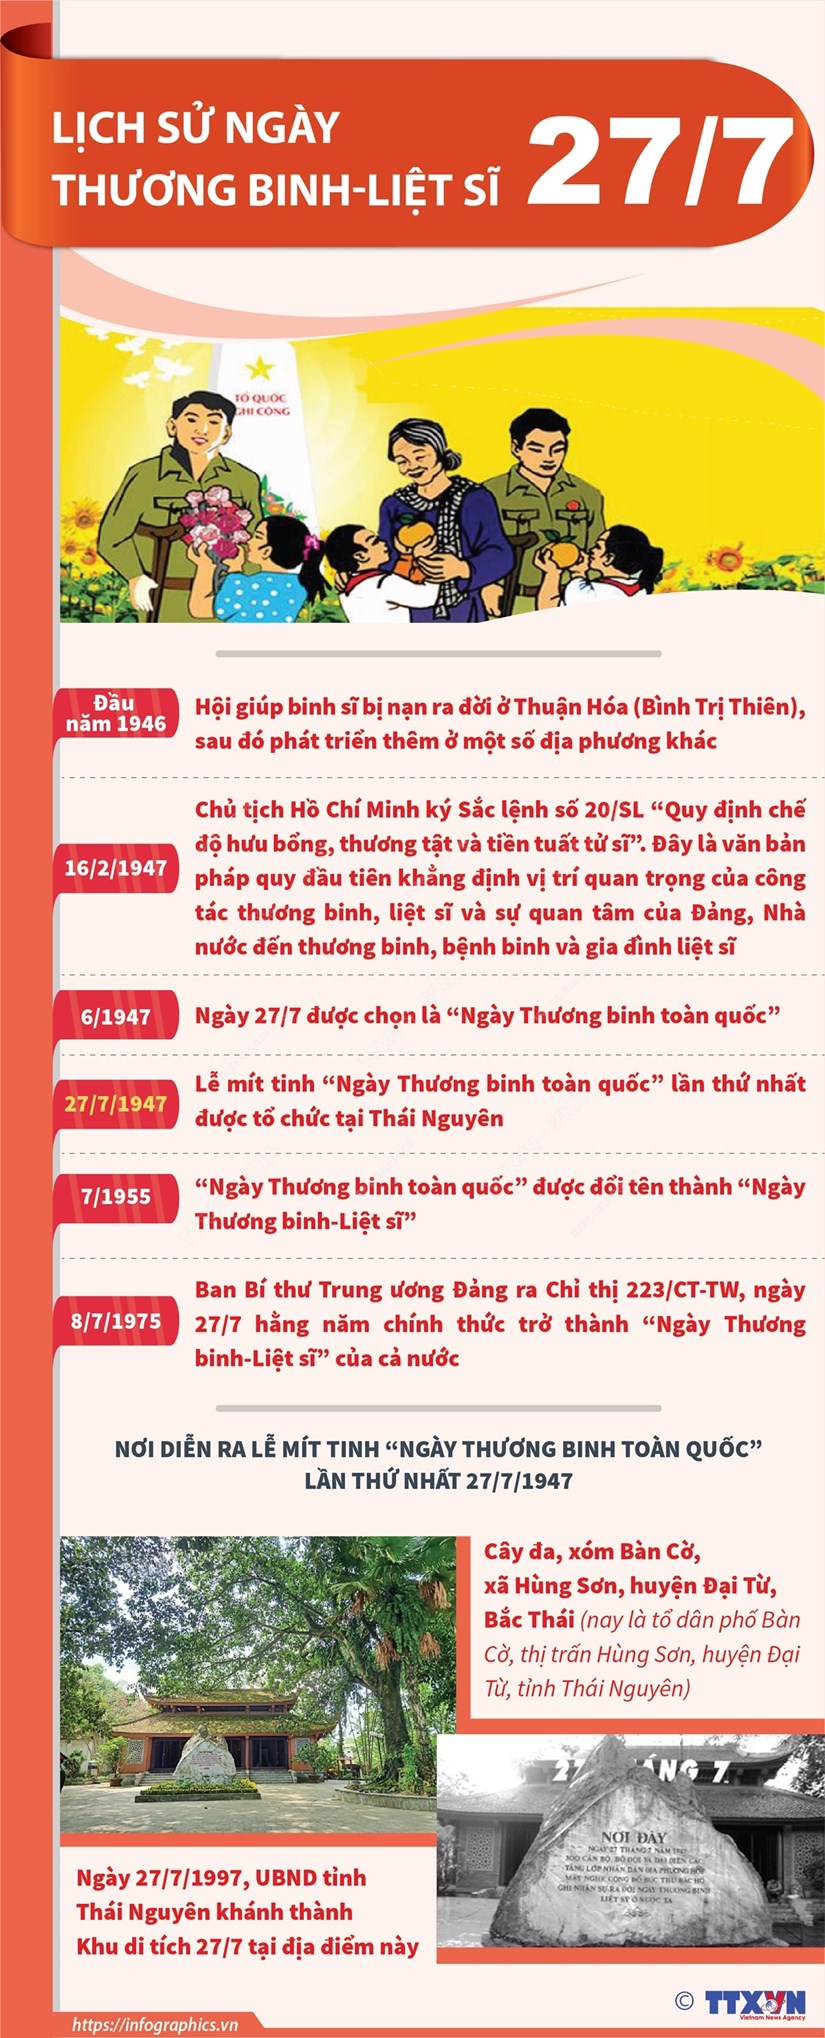 [Infographics] Lich su Ngay Thuong binh-Liet sy 27/7 hinh anh 1